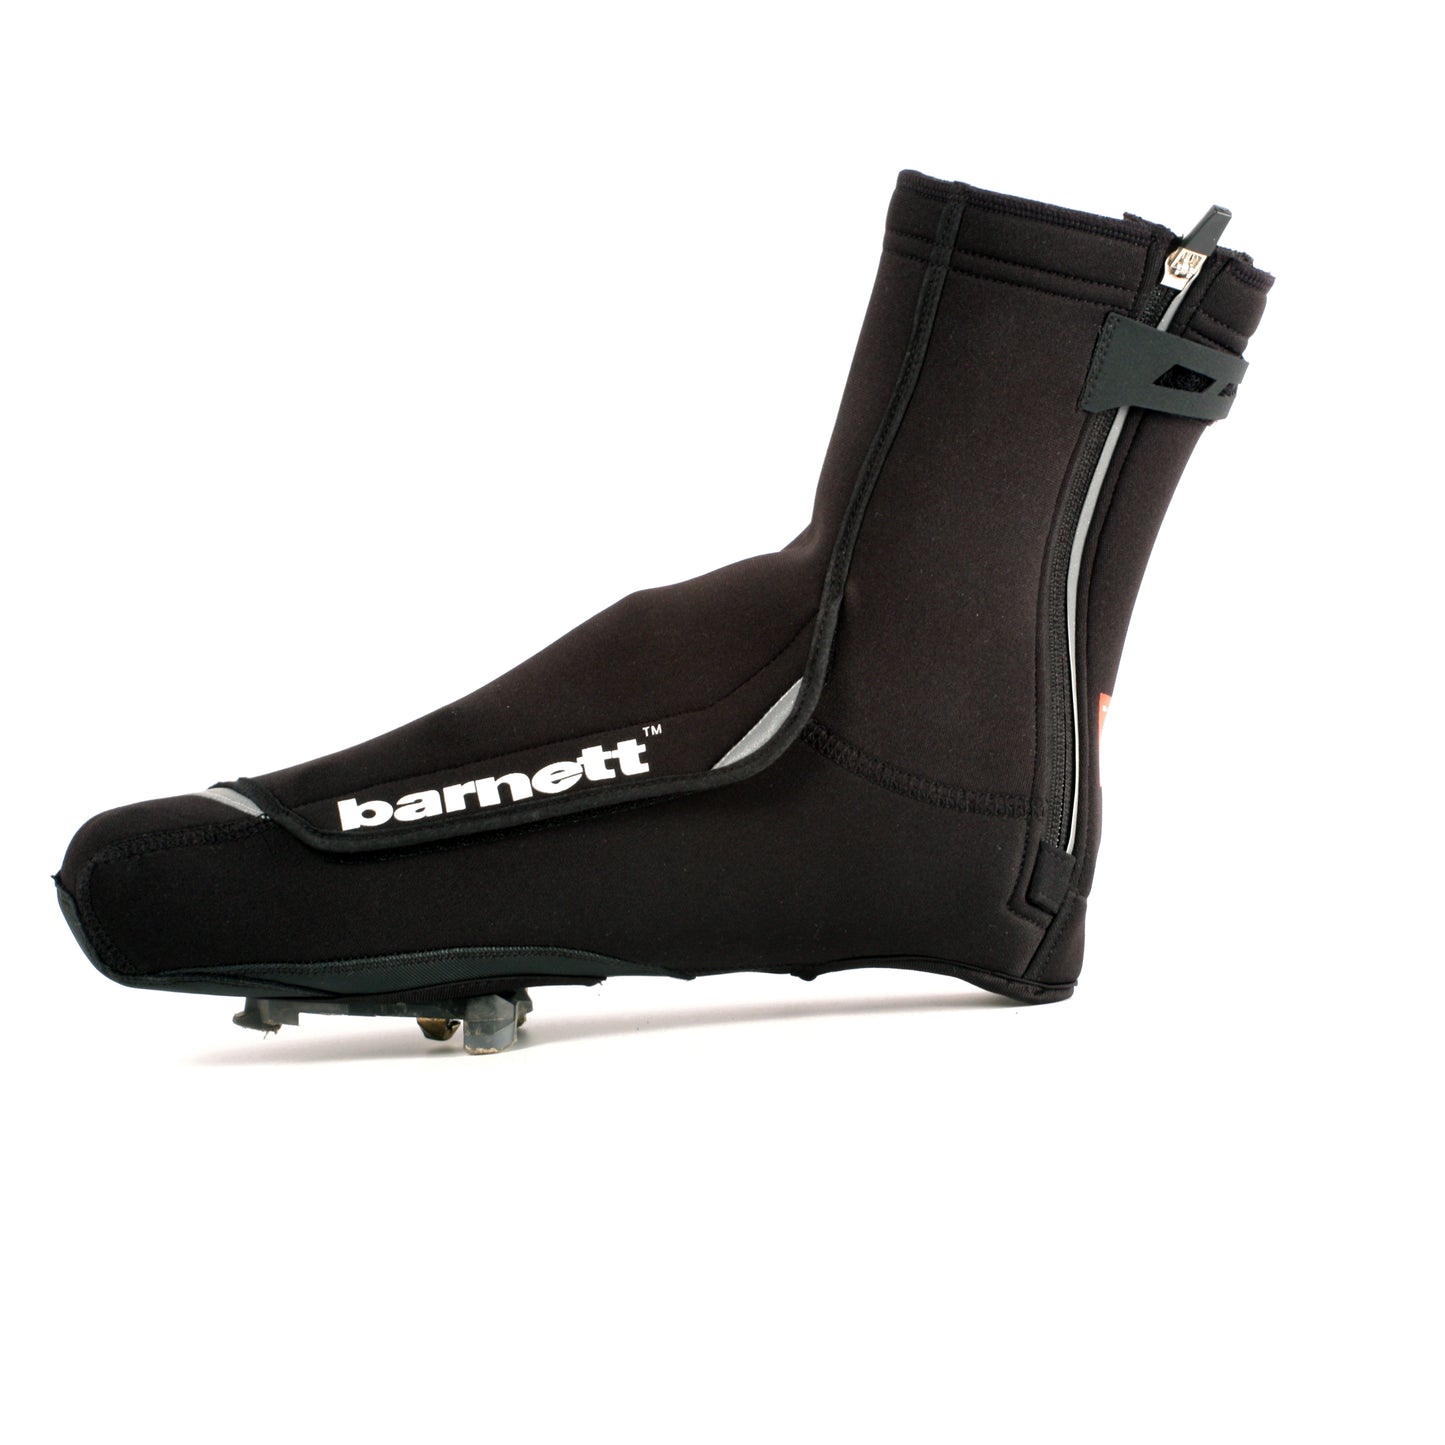 BSP-03 Cycling overshoes, Warm and water-repellent.